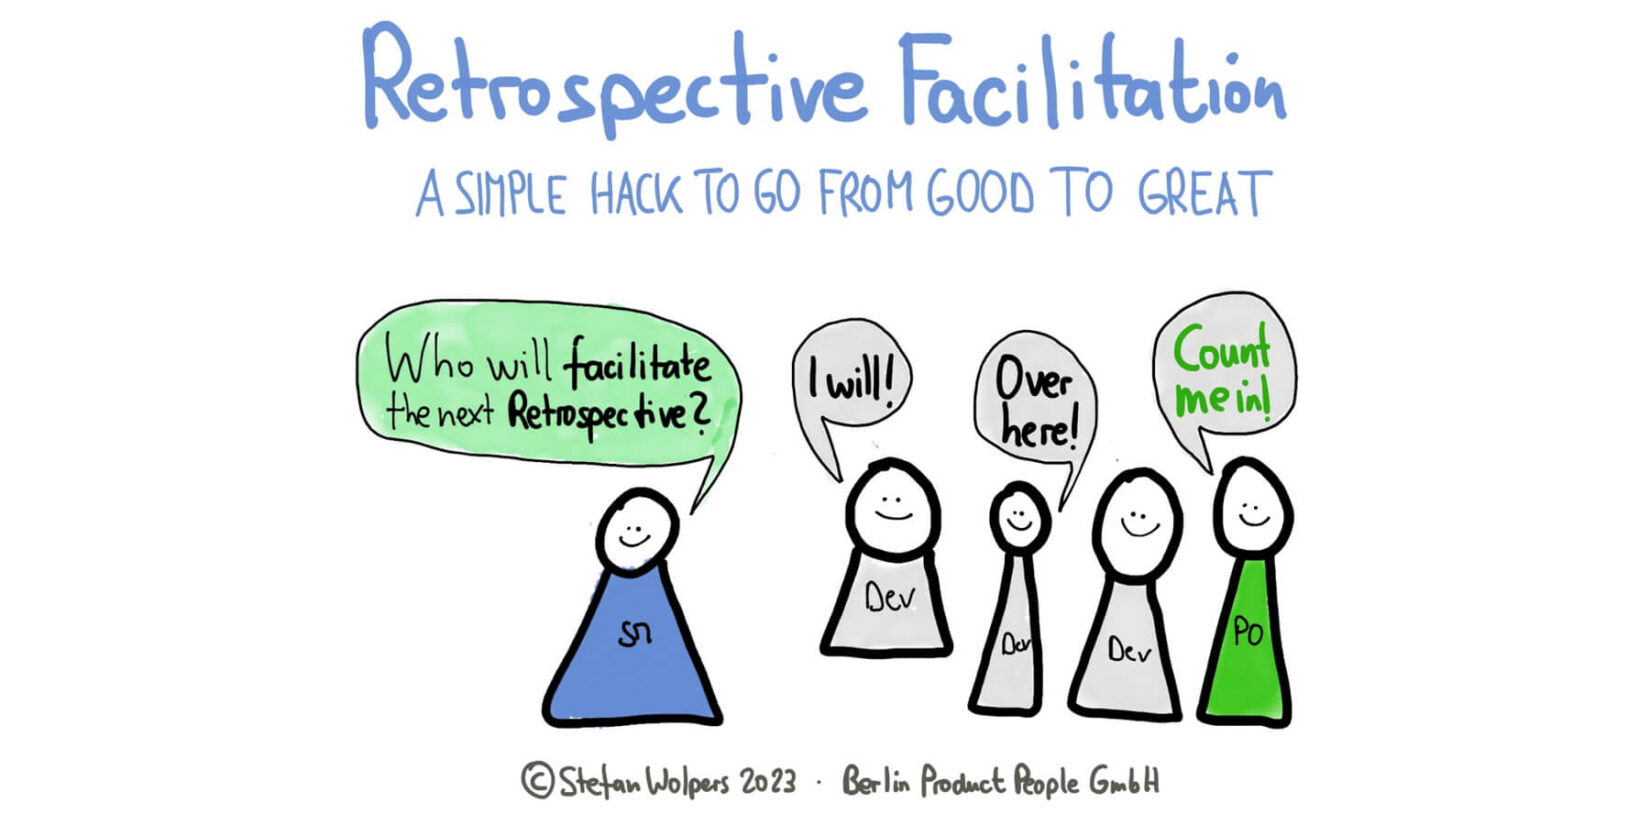 Retrospective Facilitation: A Simple Hack to Go from Good to Great — Berlin-Product-People.com